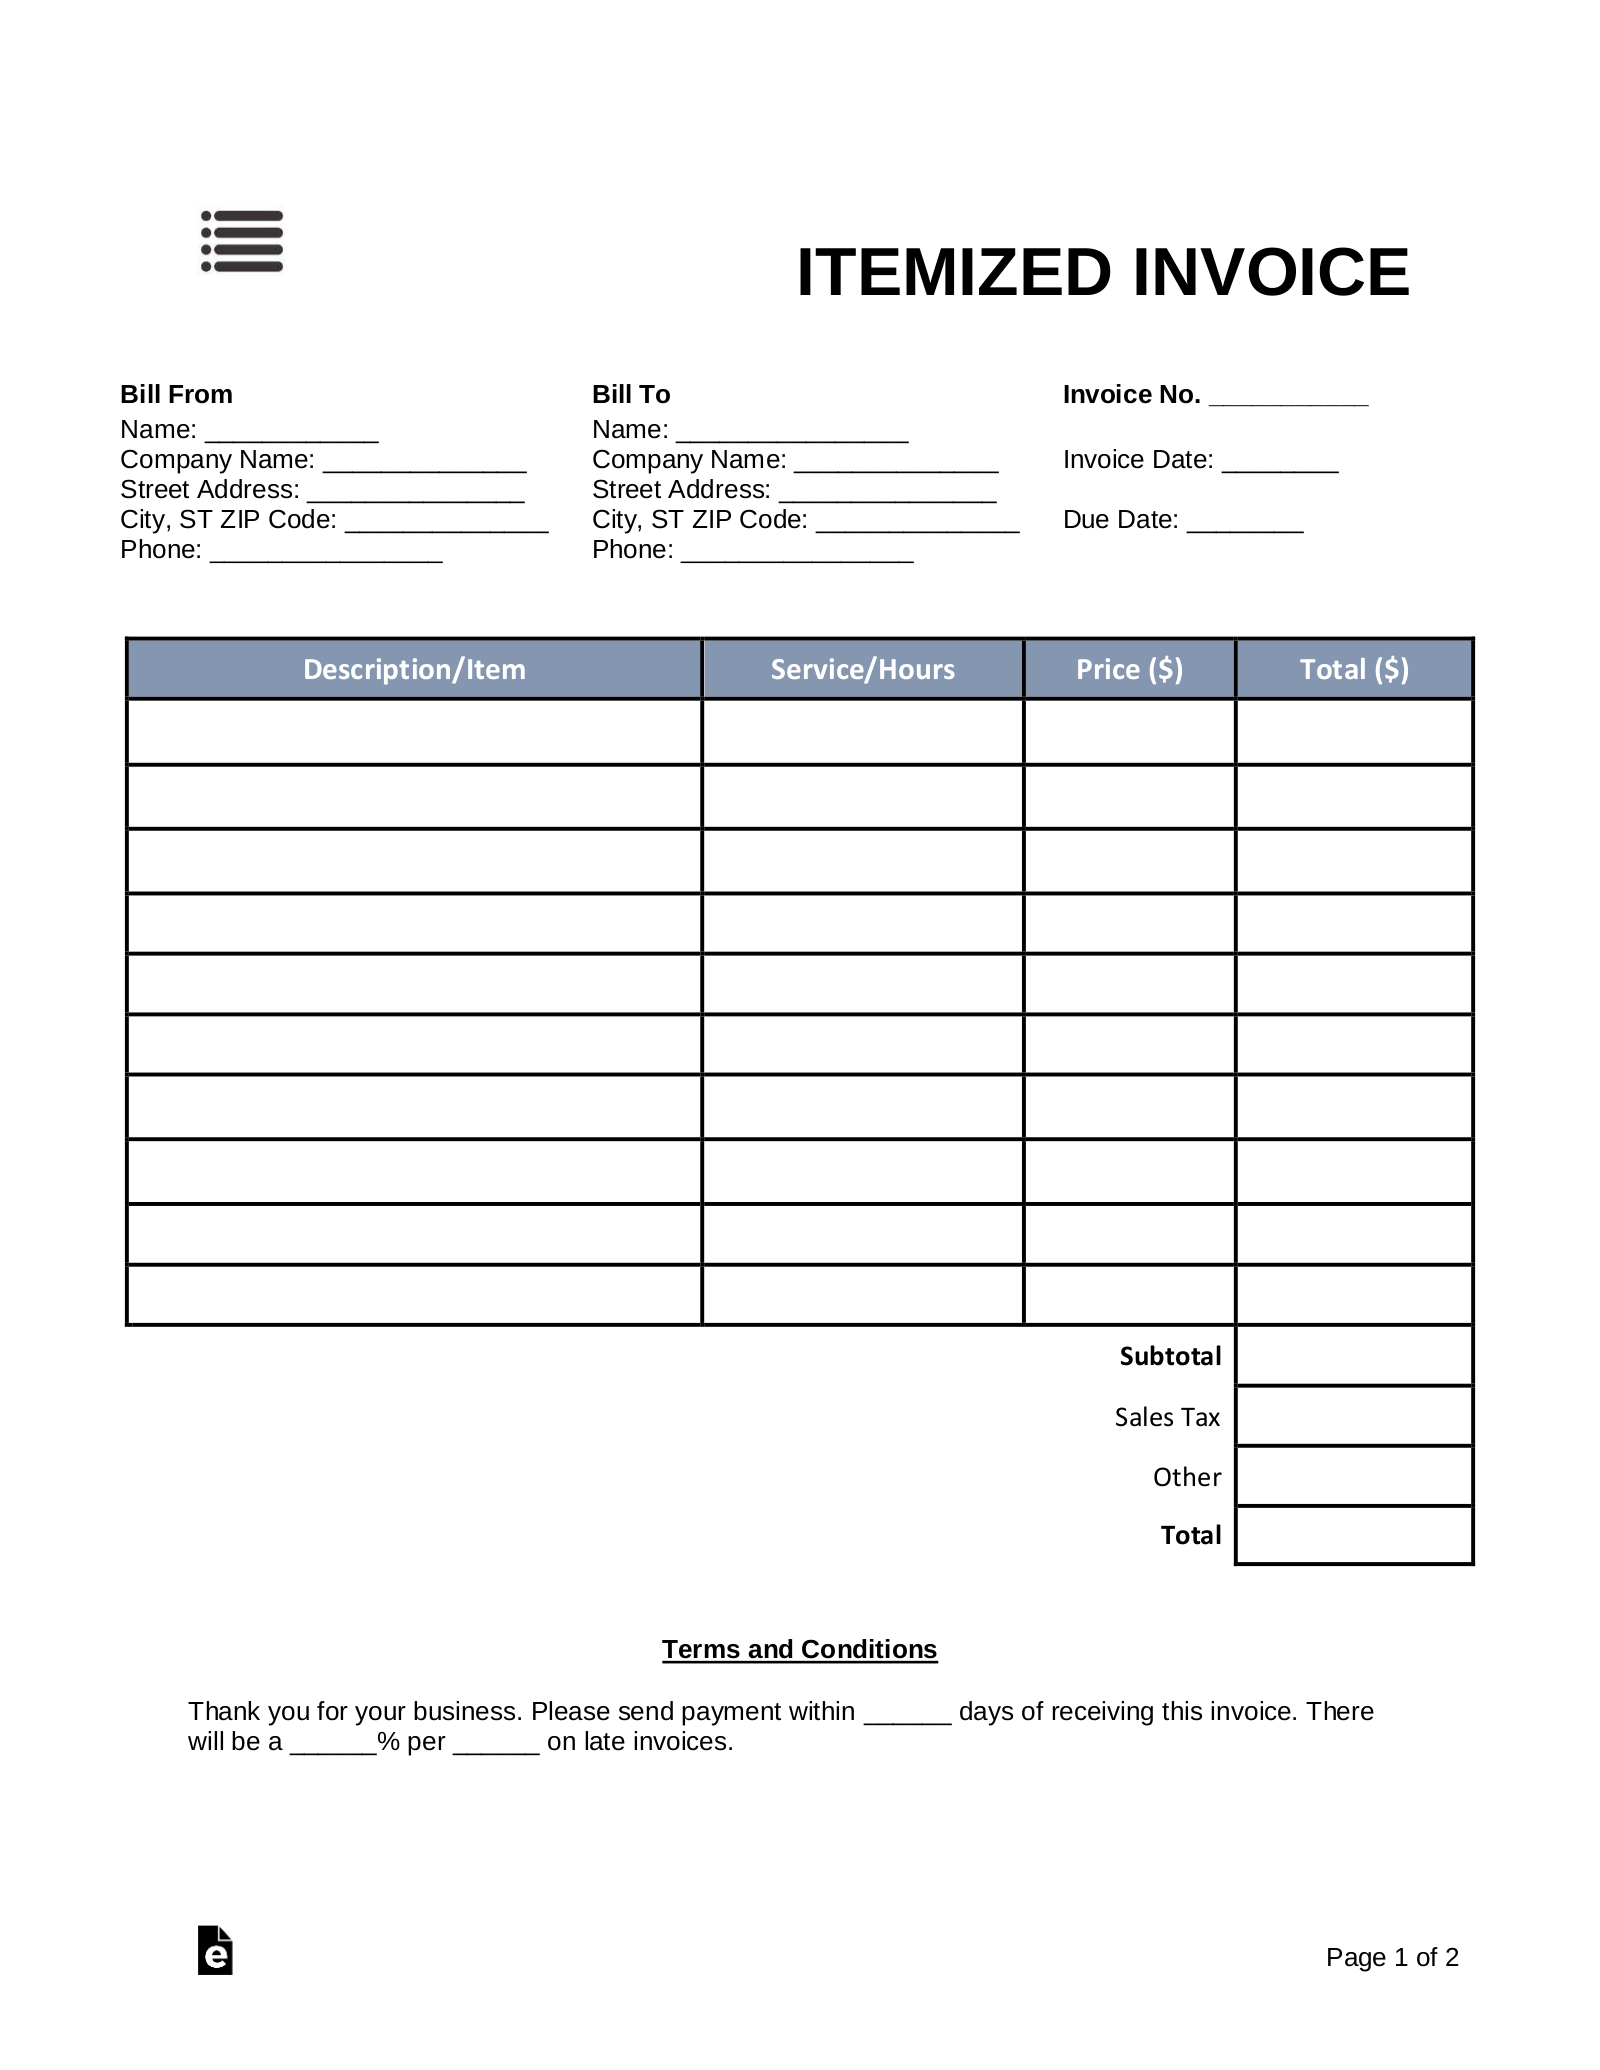 Free Itemized Invoice Template Word PDF eForms